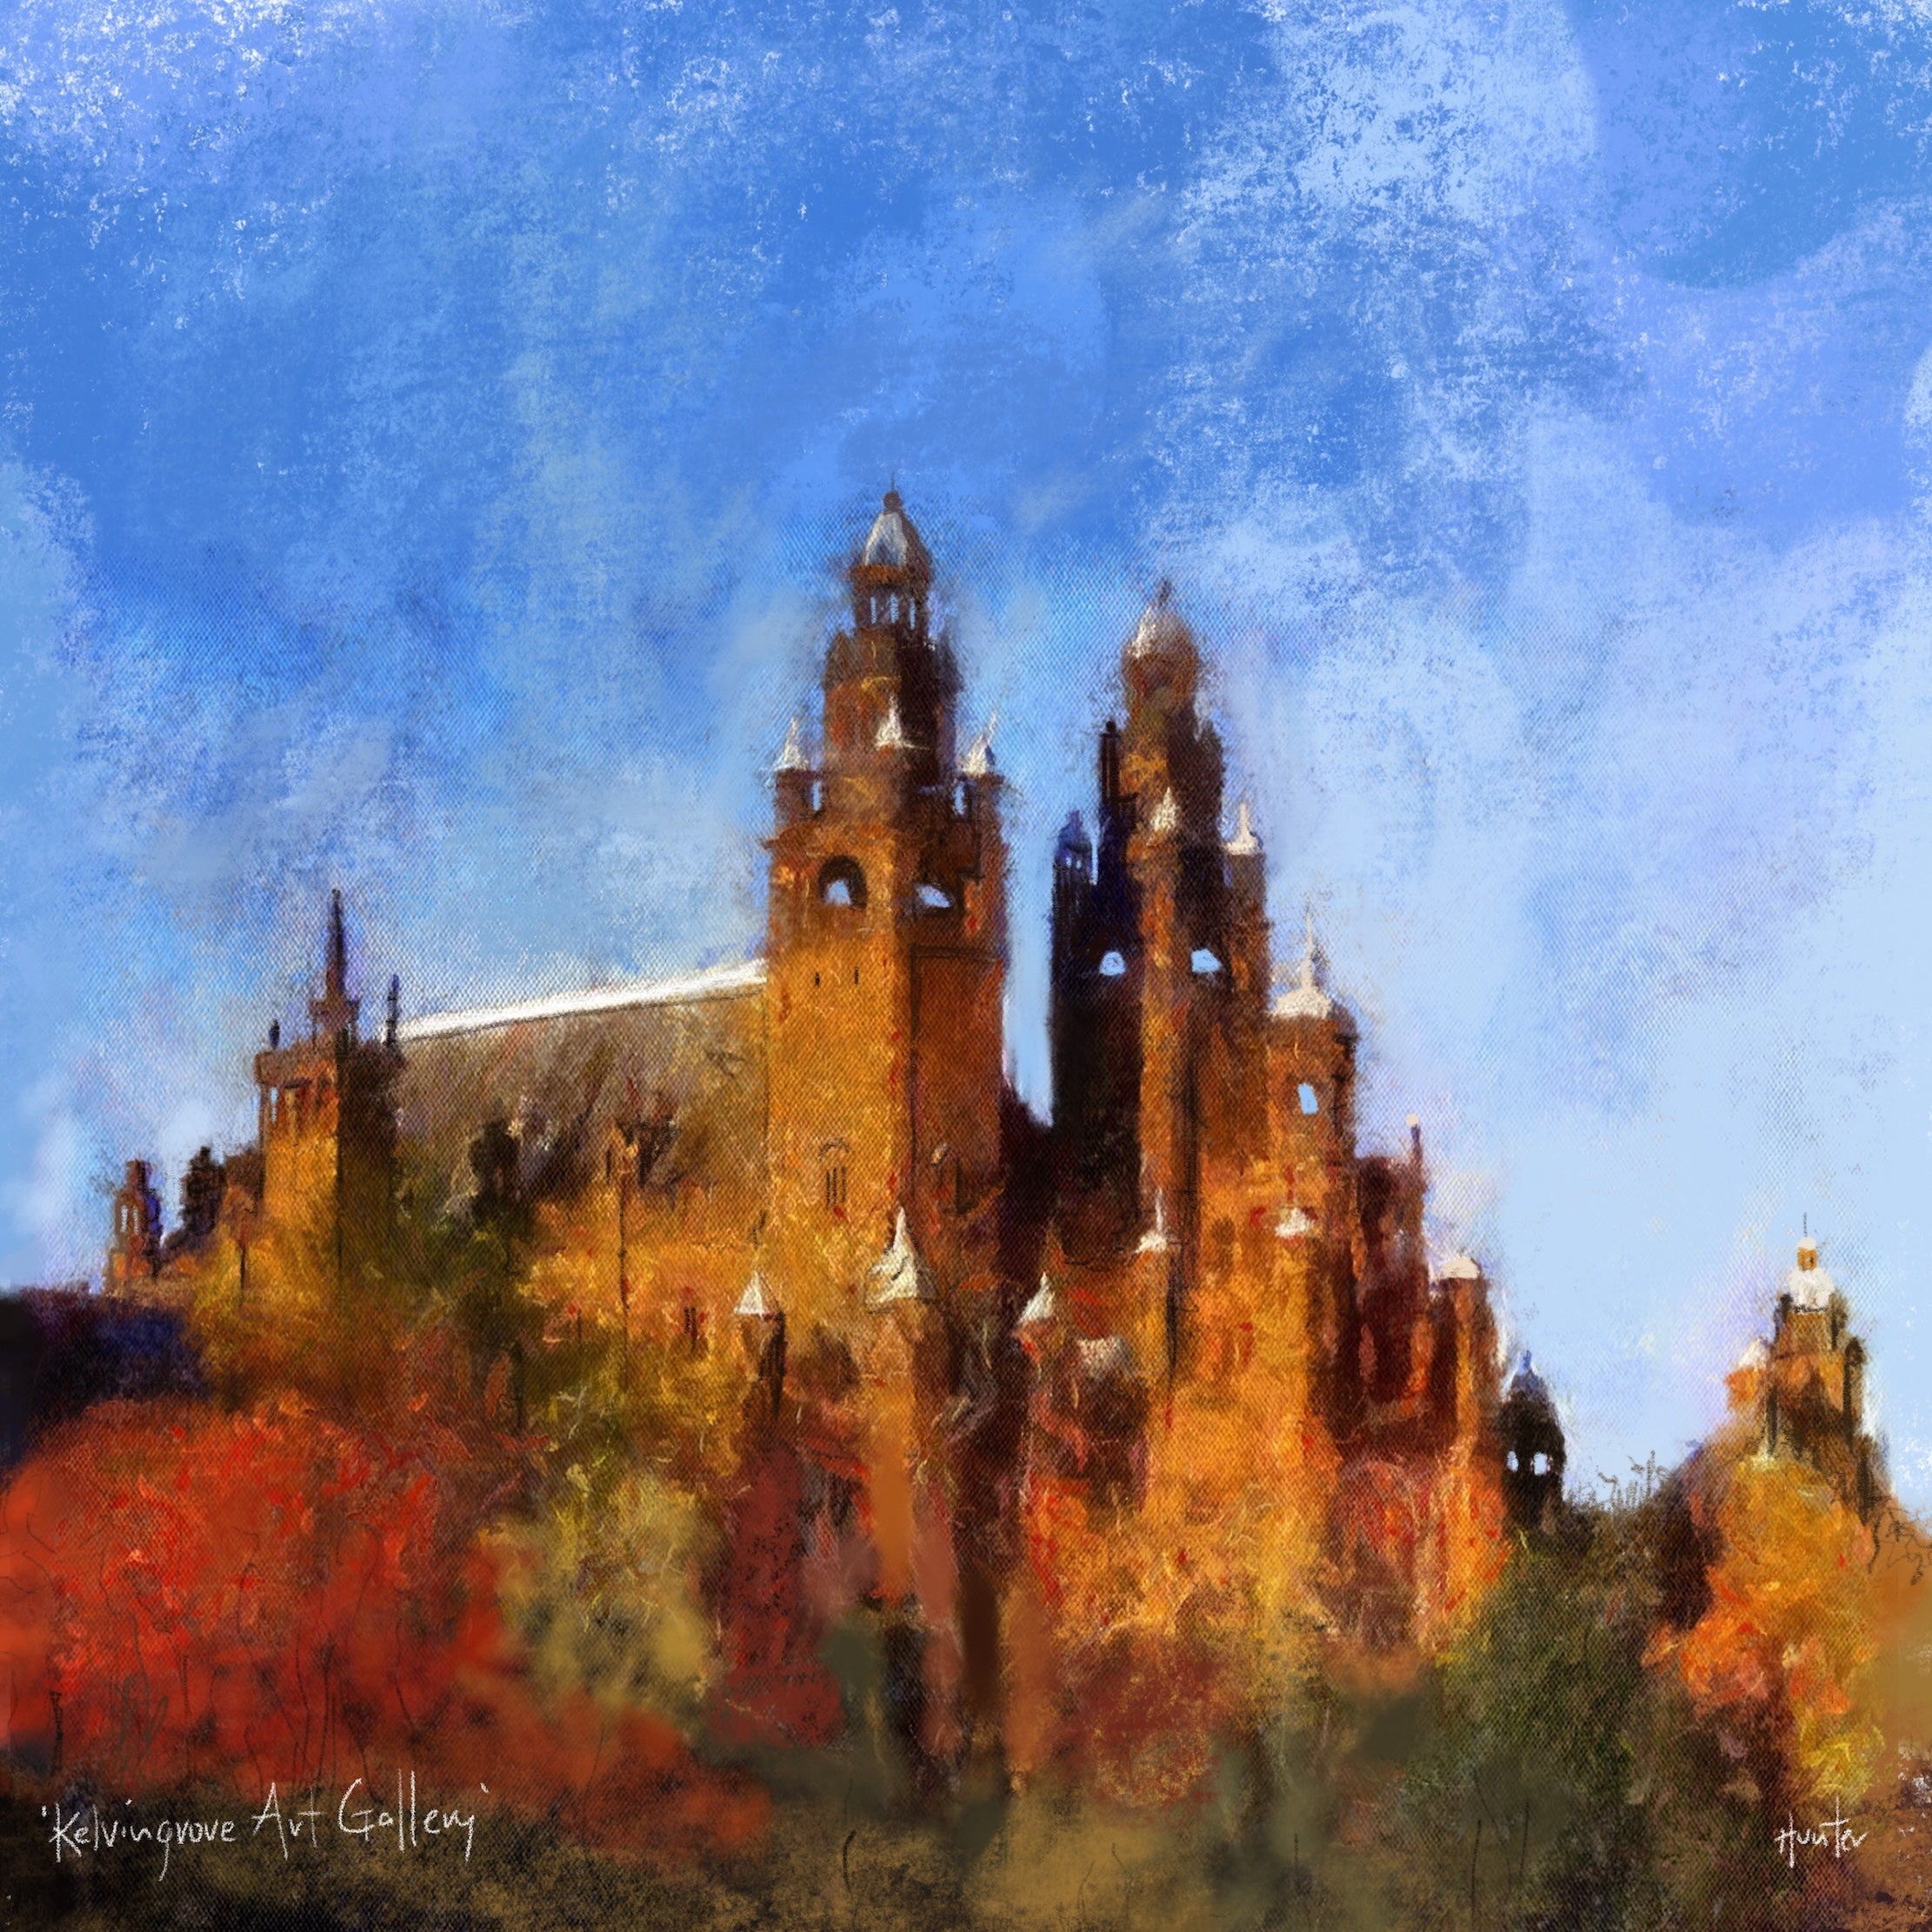 Kelvingrove Art Gallery | Scotland In Your Pocket Print-Scotland In Your Pocket Framed Prints-Edinburgh & Glasgow Art Gallery-Mounted & Cello Bag: 12.5x12.5 cm-Black Frame-Paintings, Prints, Homeware, Art Gifts From Scotland By Scottish Artist Kevin Hunter